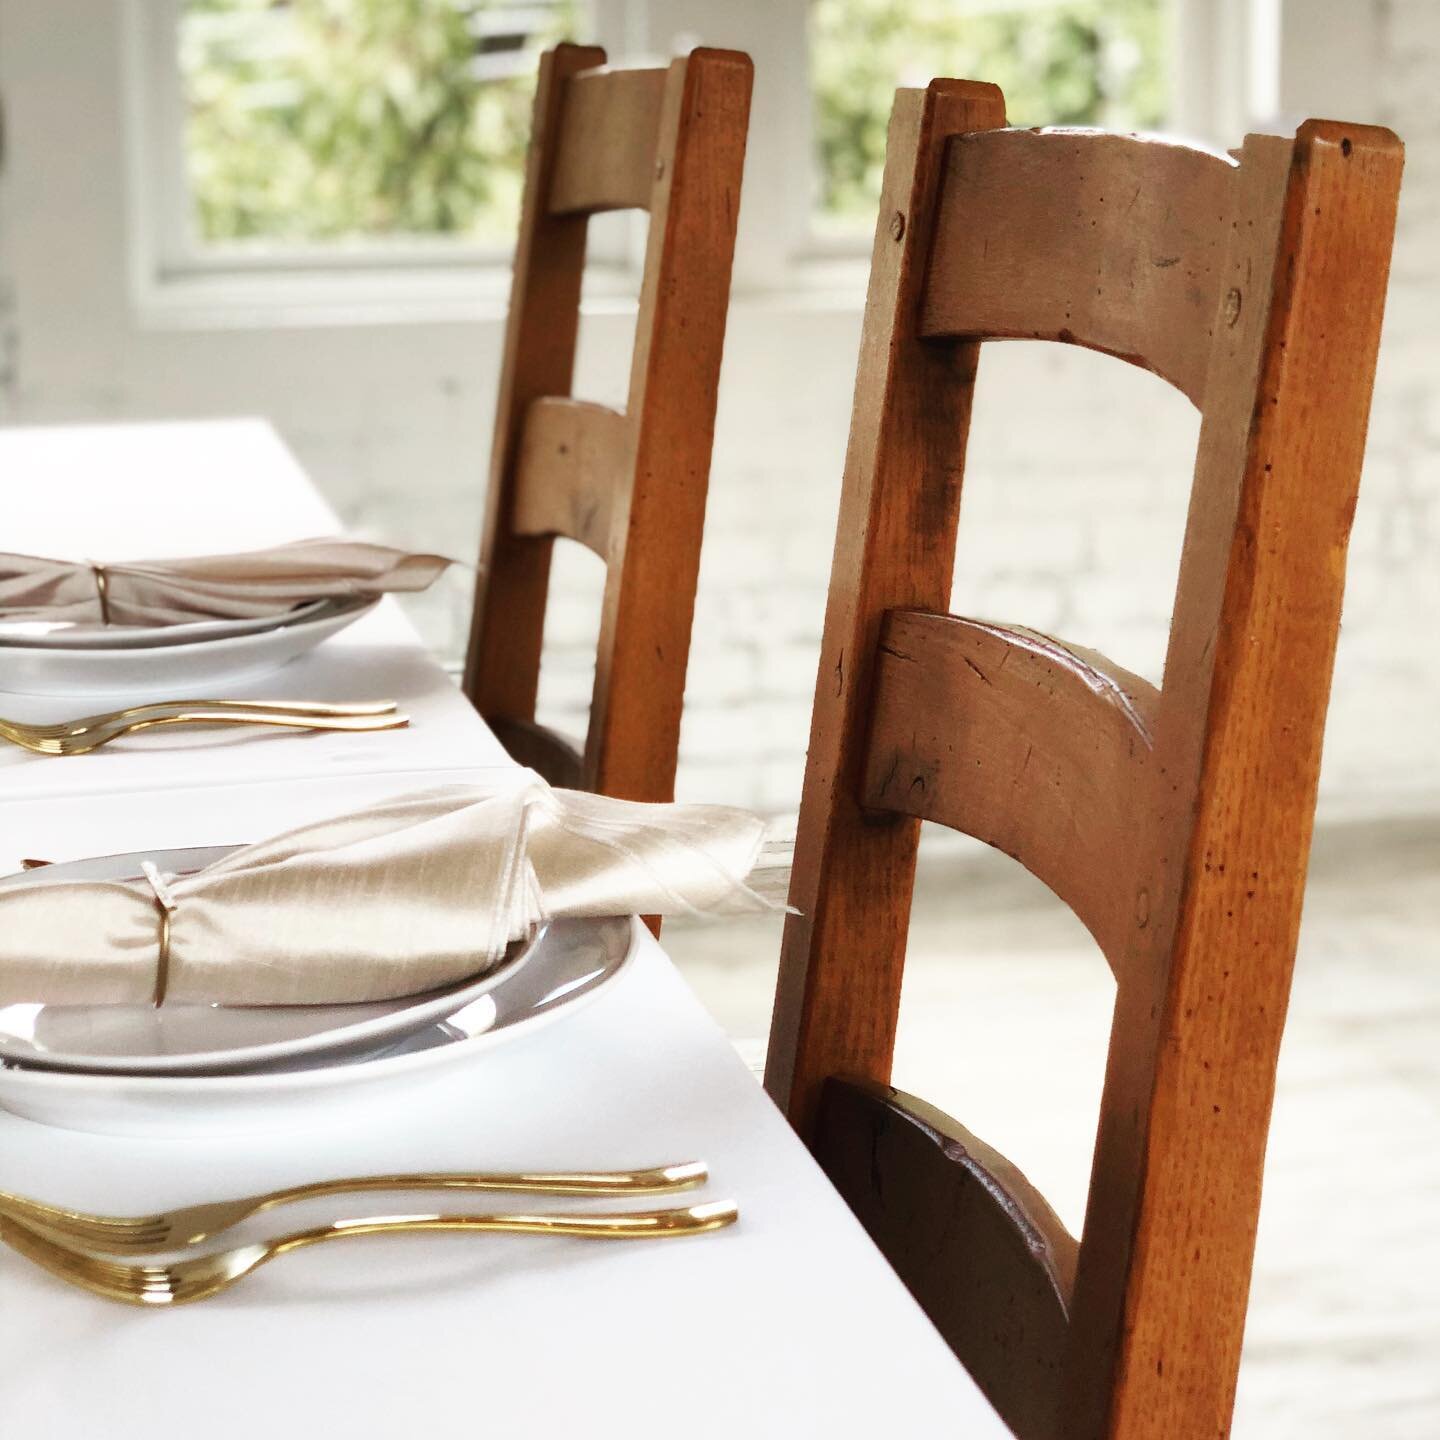 A head table calls for statement chairs. These two @crateandbarrel beauties were just added to our collection.